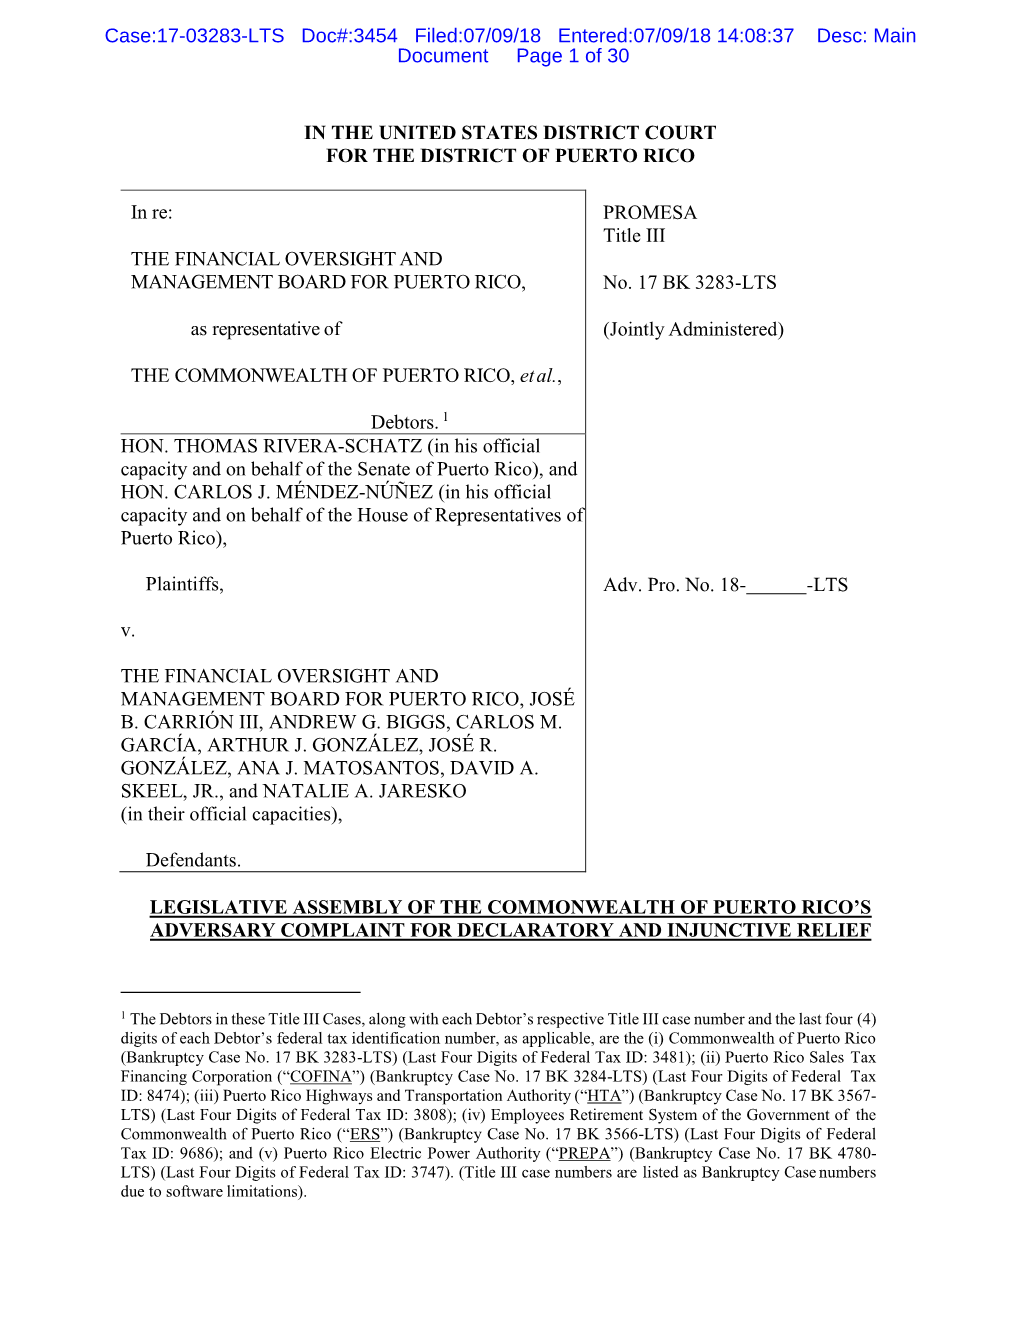 Case:17-03283-LTS Doc#:3454 Filed:07/09/18 Entered:07/09/18 14:08:37 Desc: Main Document Page 1 of 30